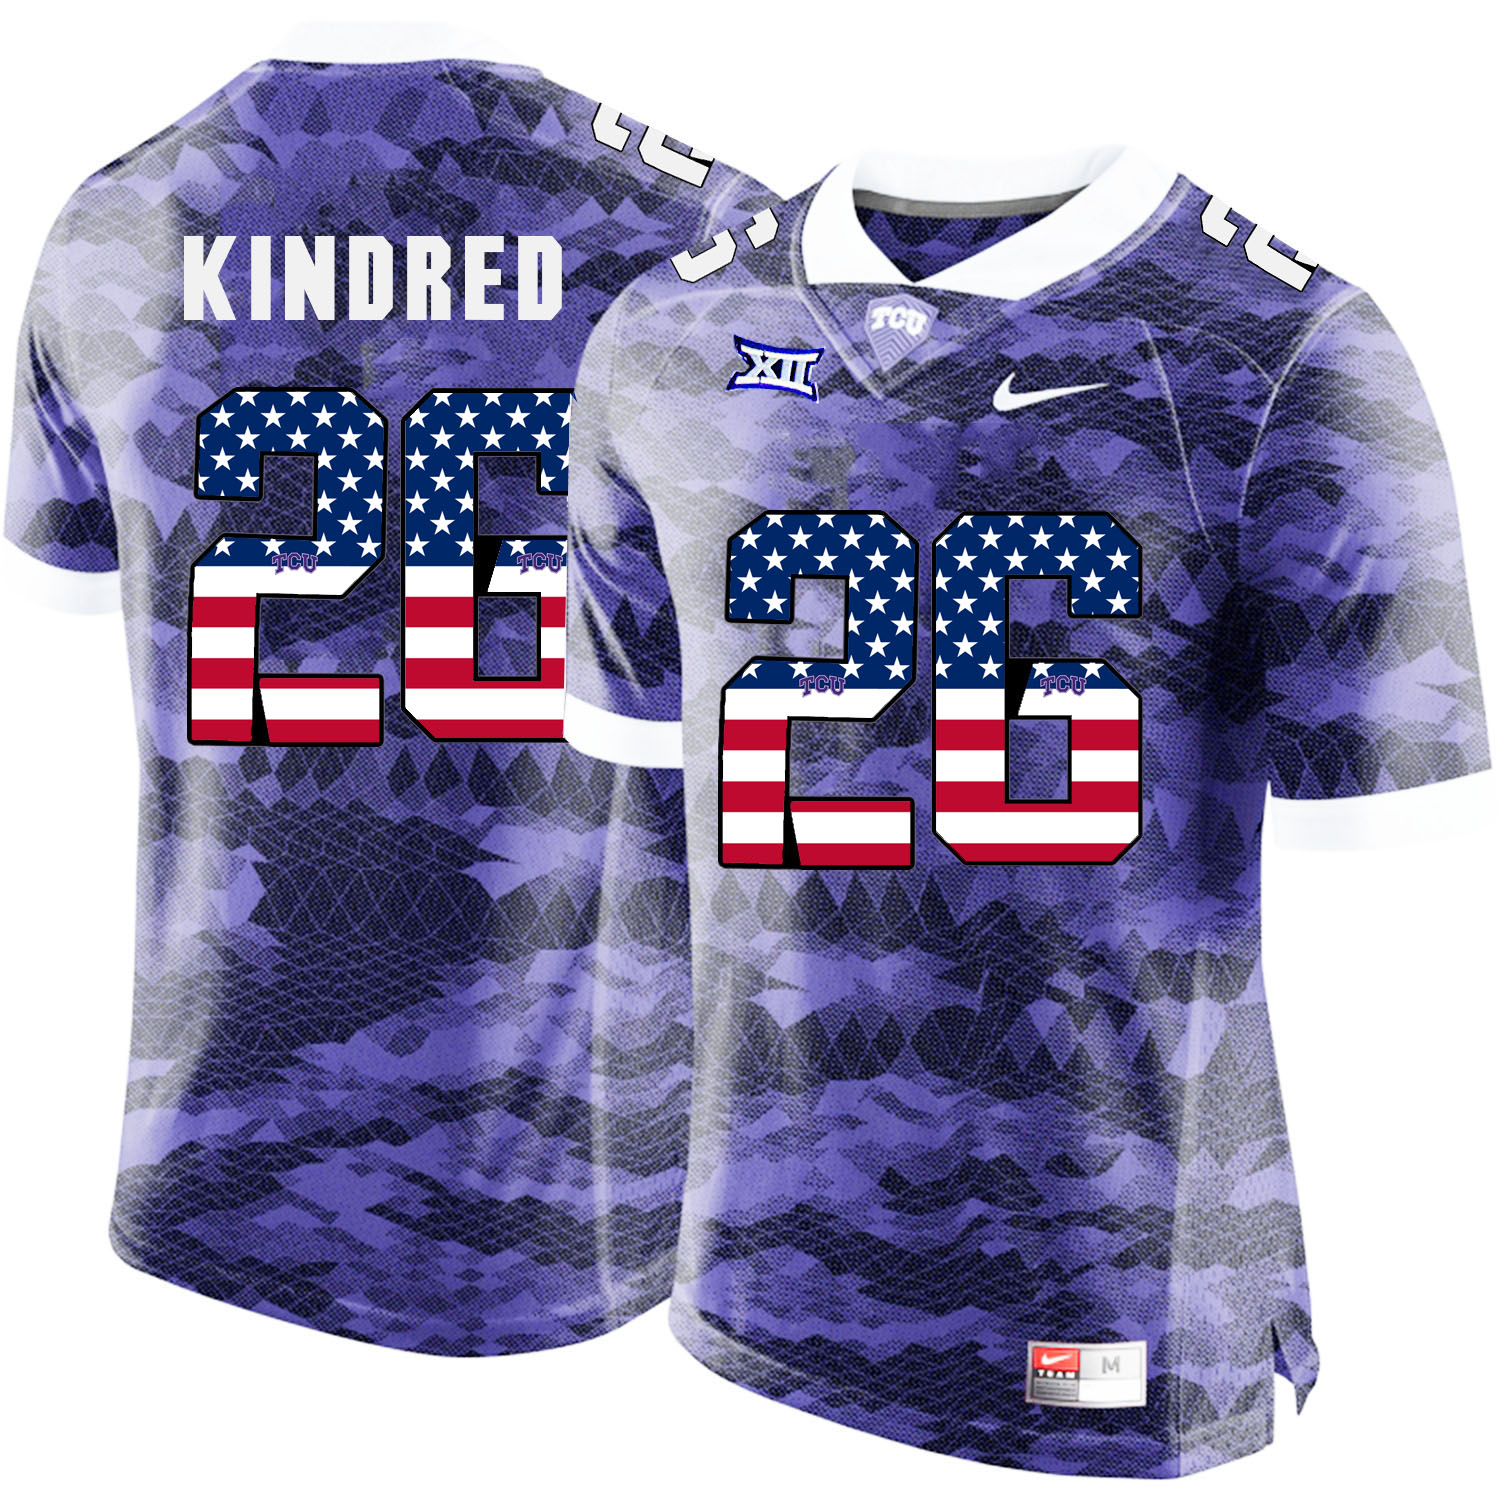 TCU Horned Frogs 26 Derrick Kindred Purple USA Flag College Football Jersey